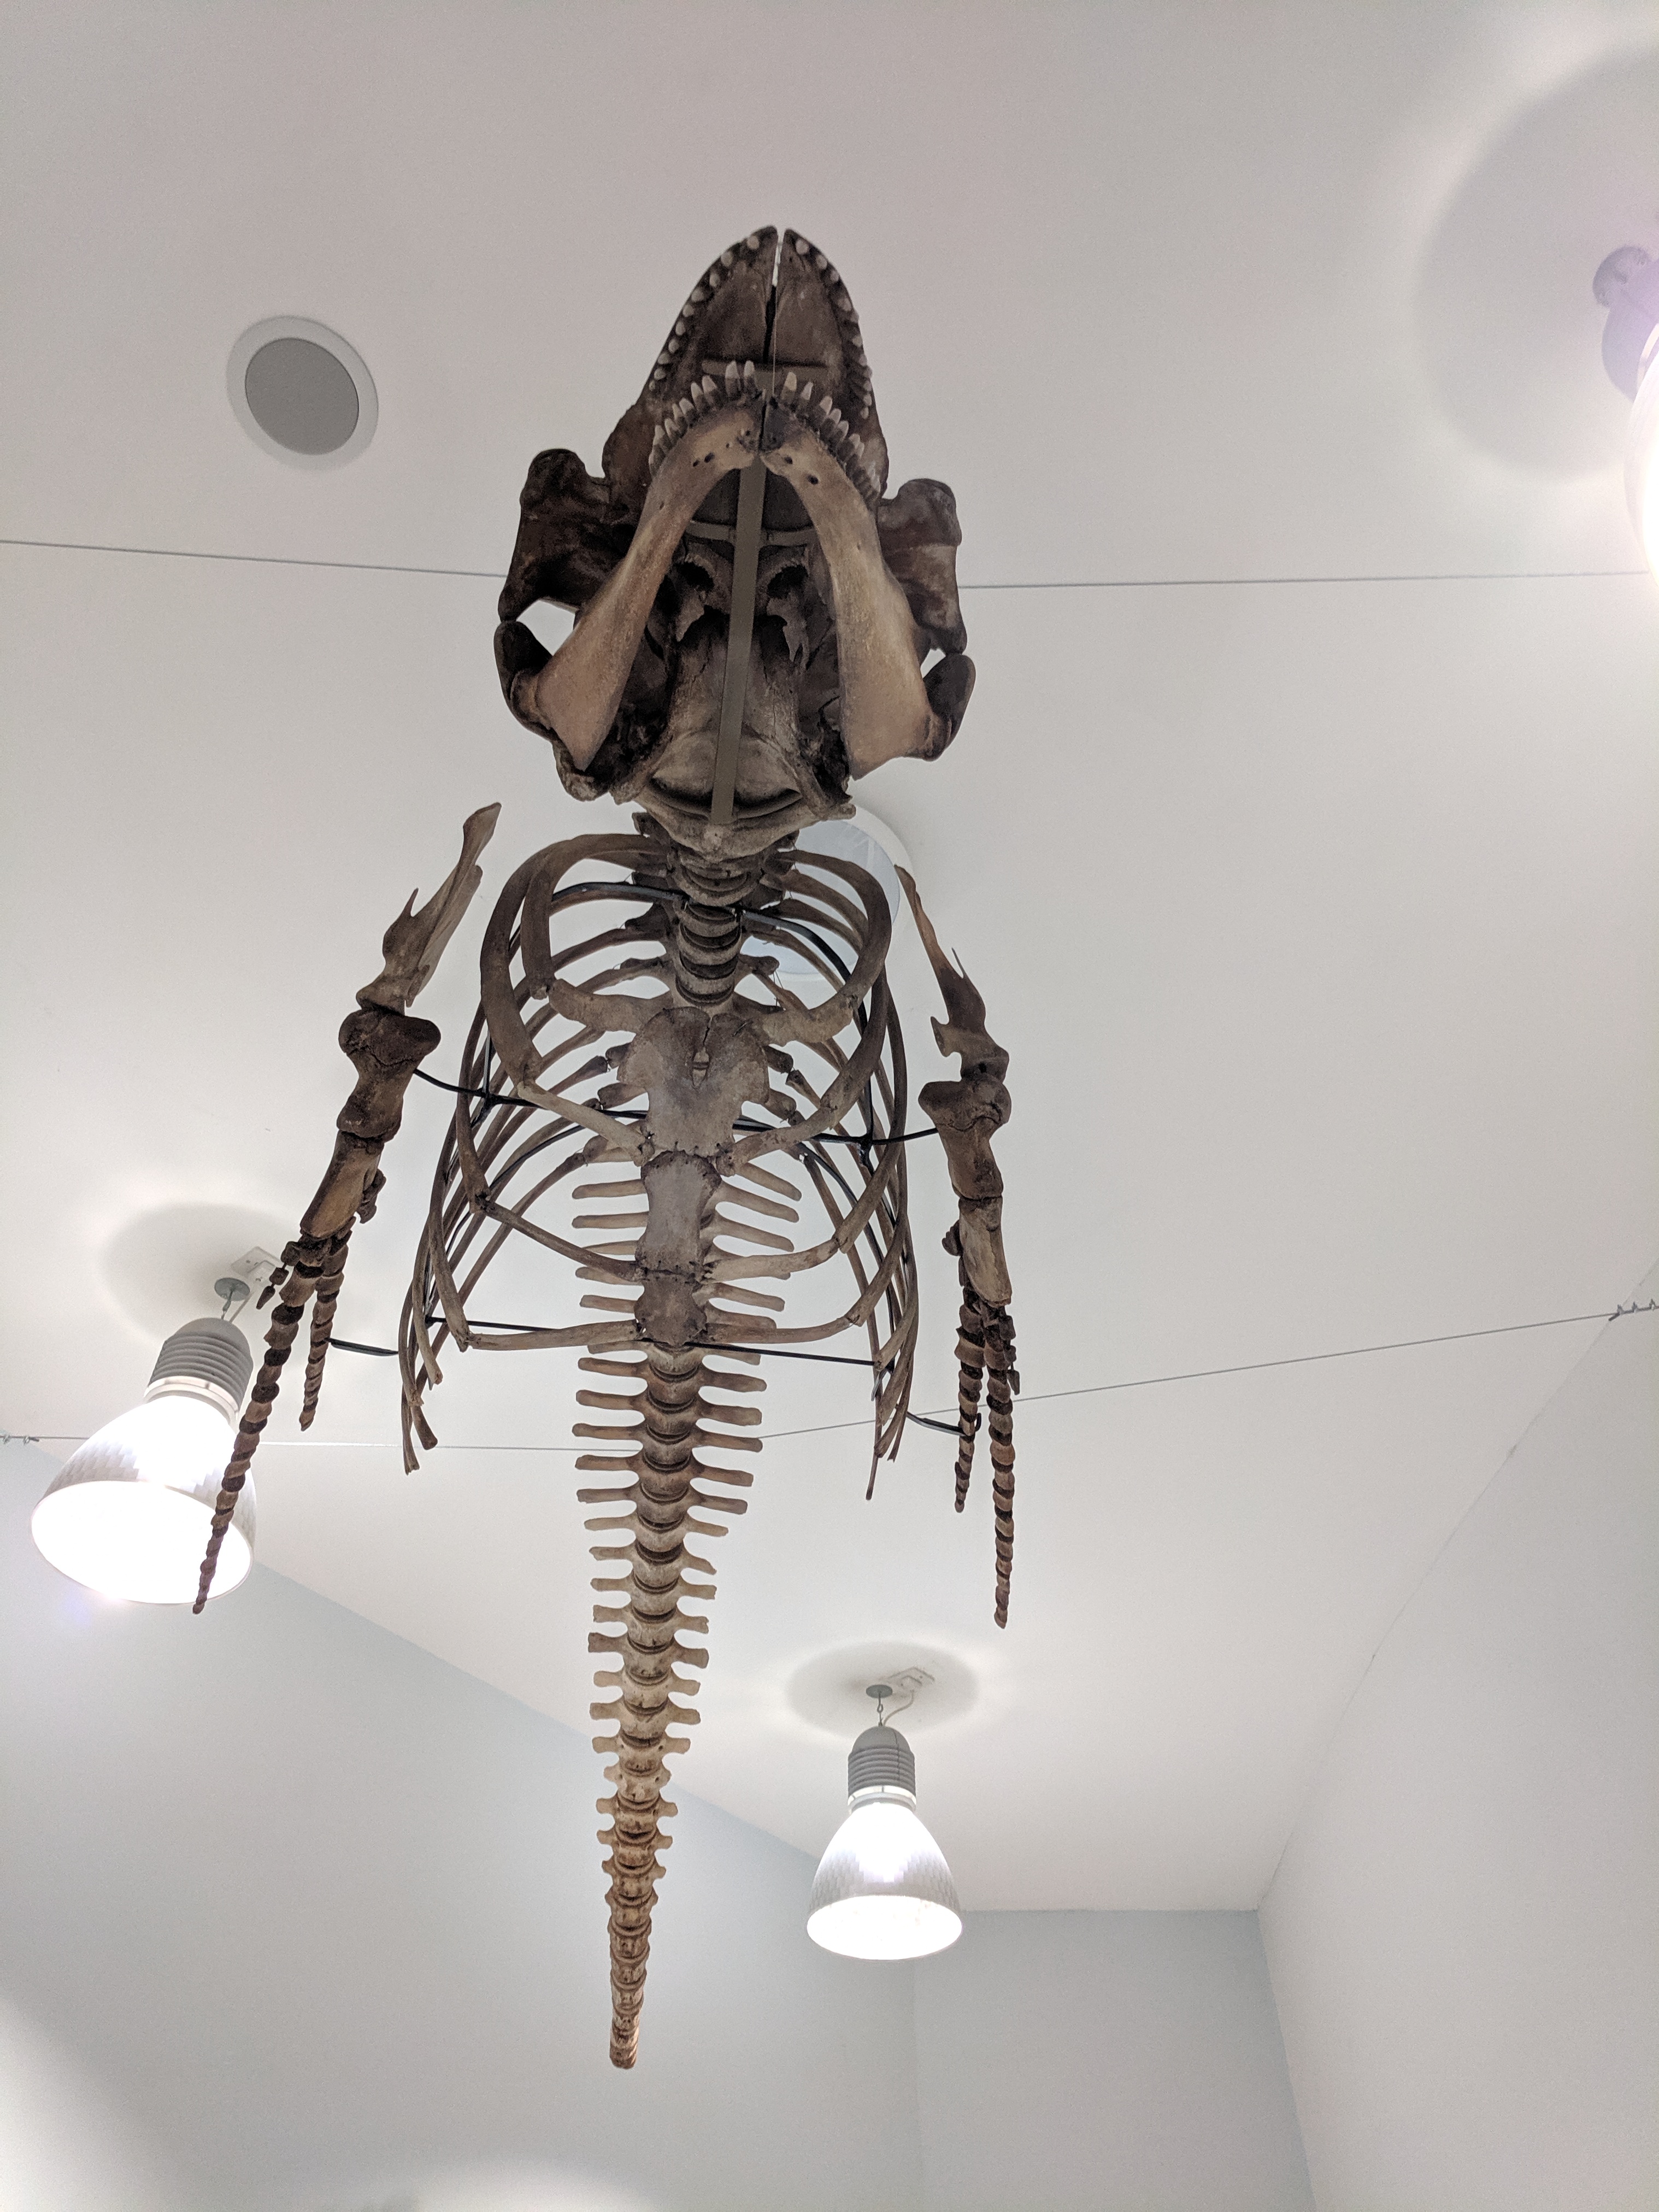 The skeleton of a long-finned pilot whale on display at Leeds City Museum